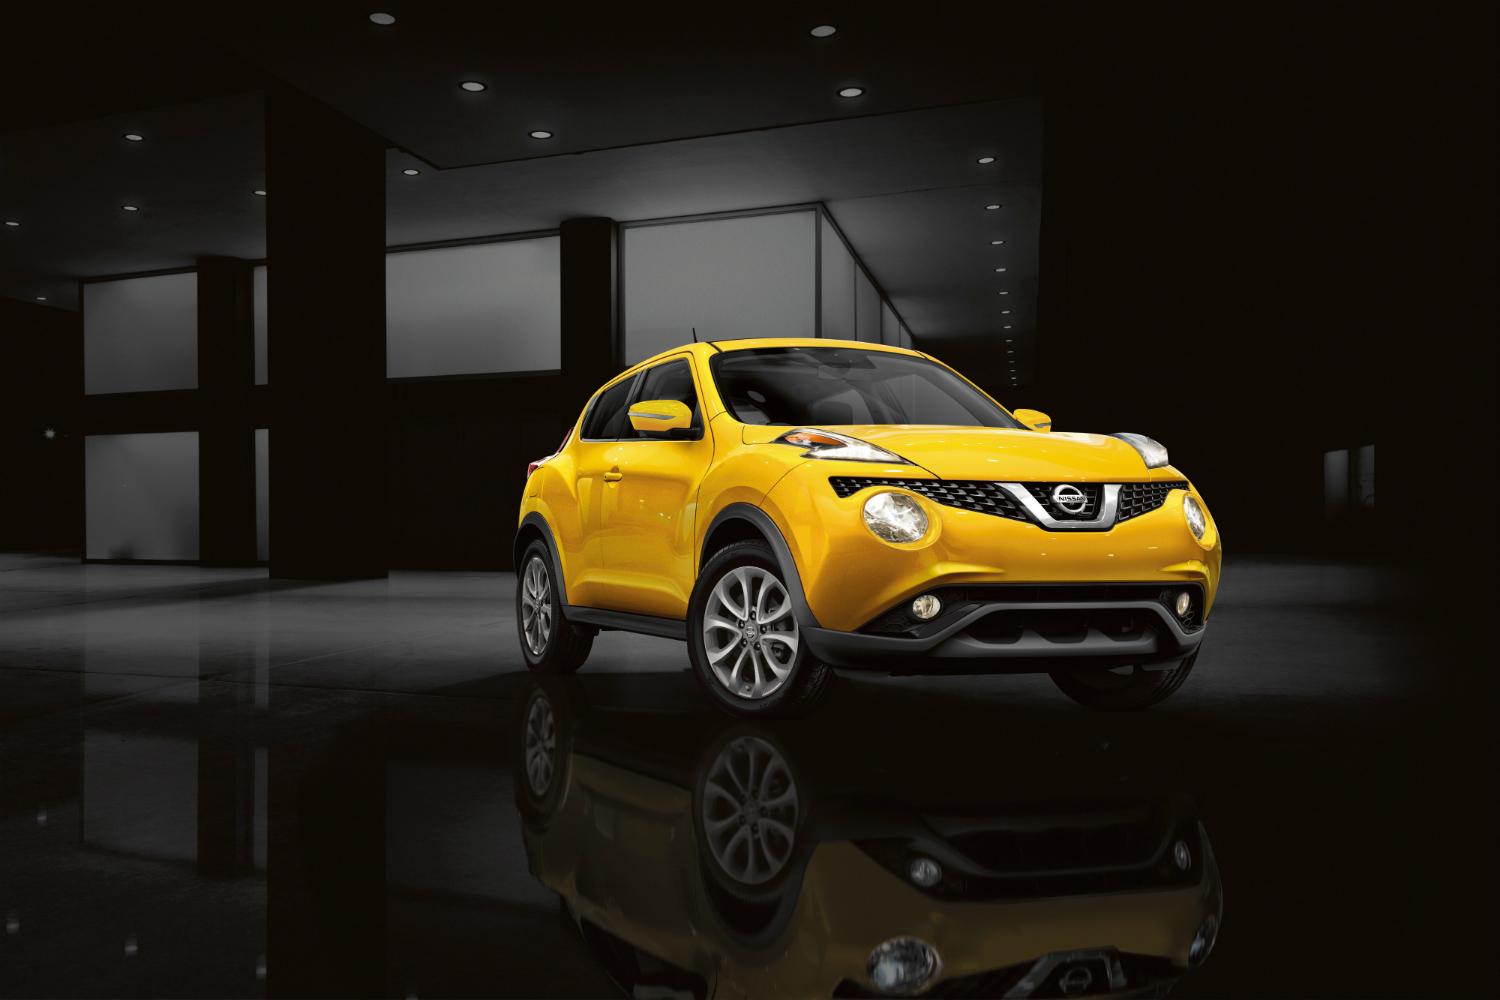 2015 Nissan Juke, Official specs, pictures, performance